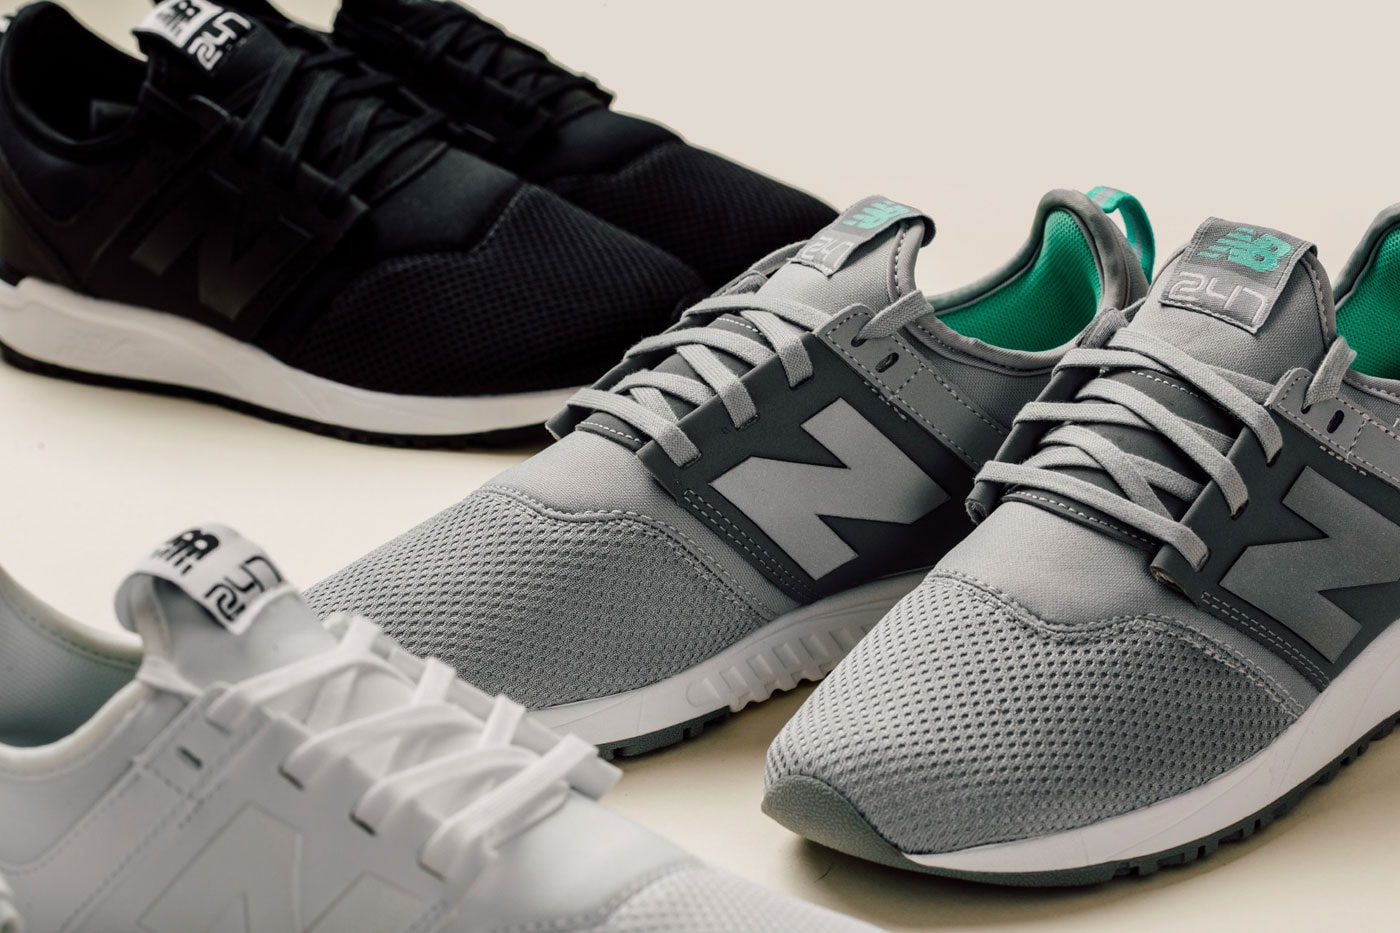 New Balance 247 "Classic" Collection